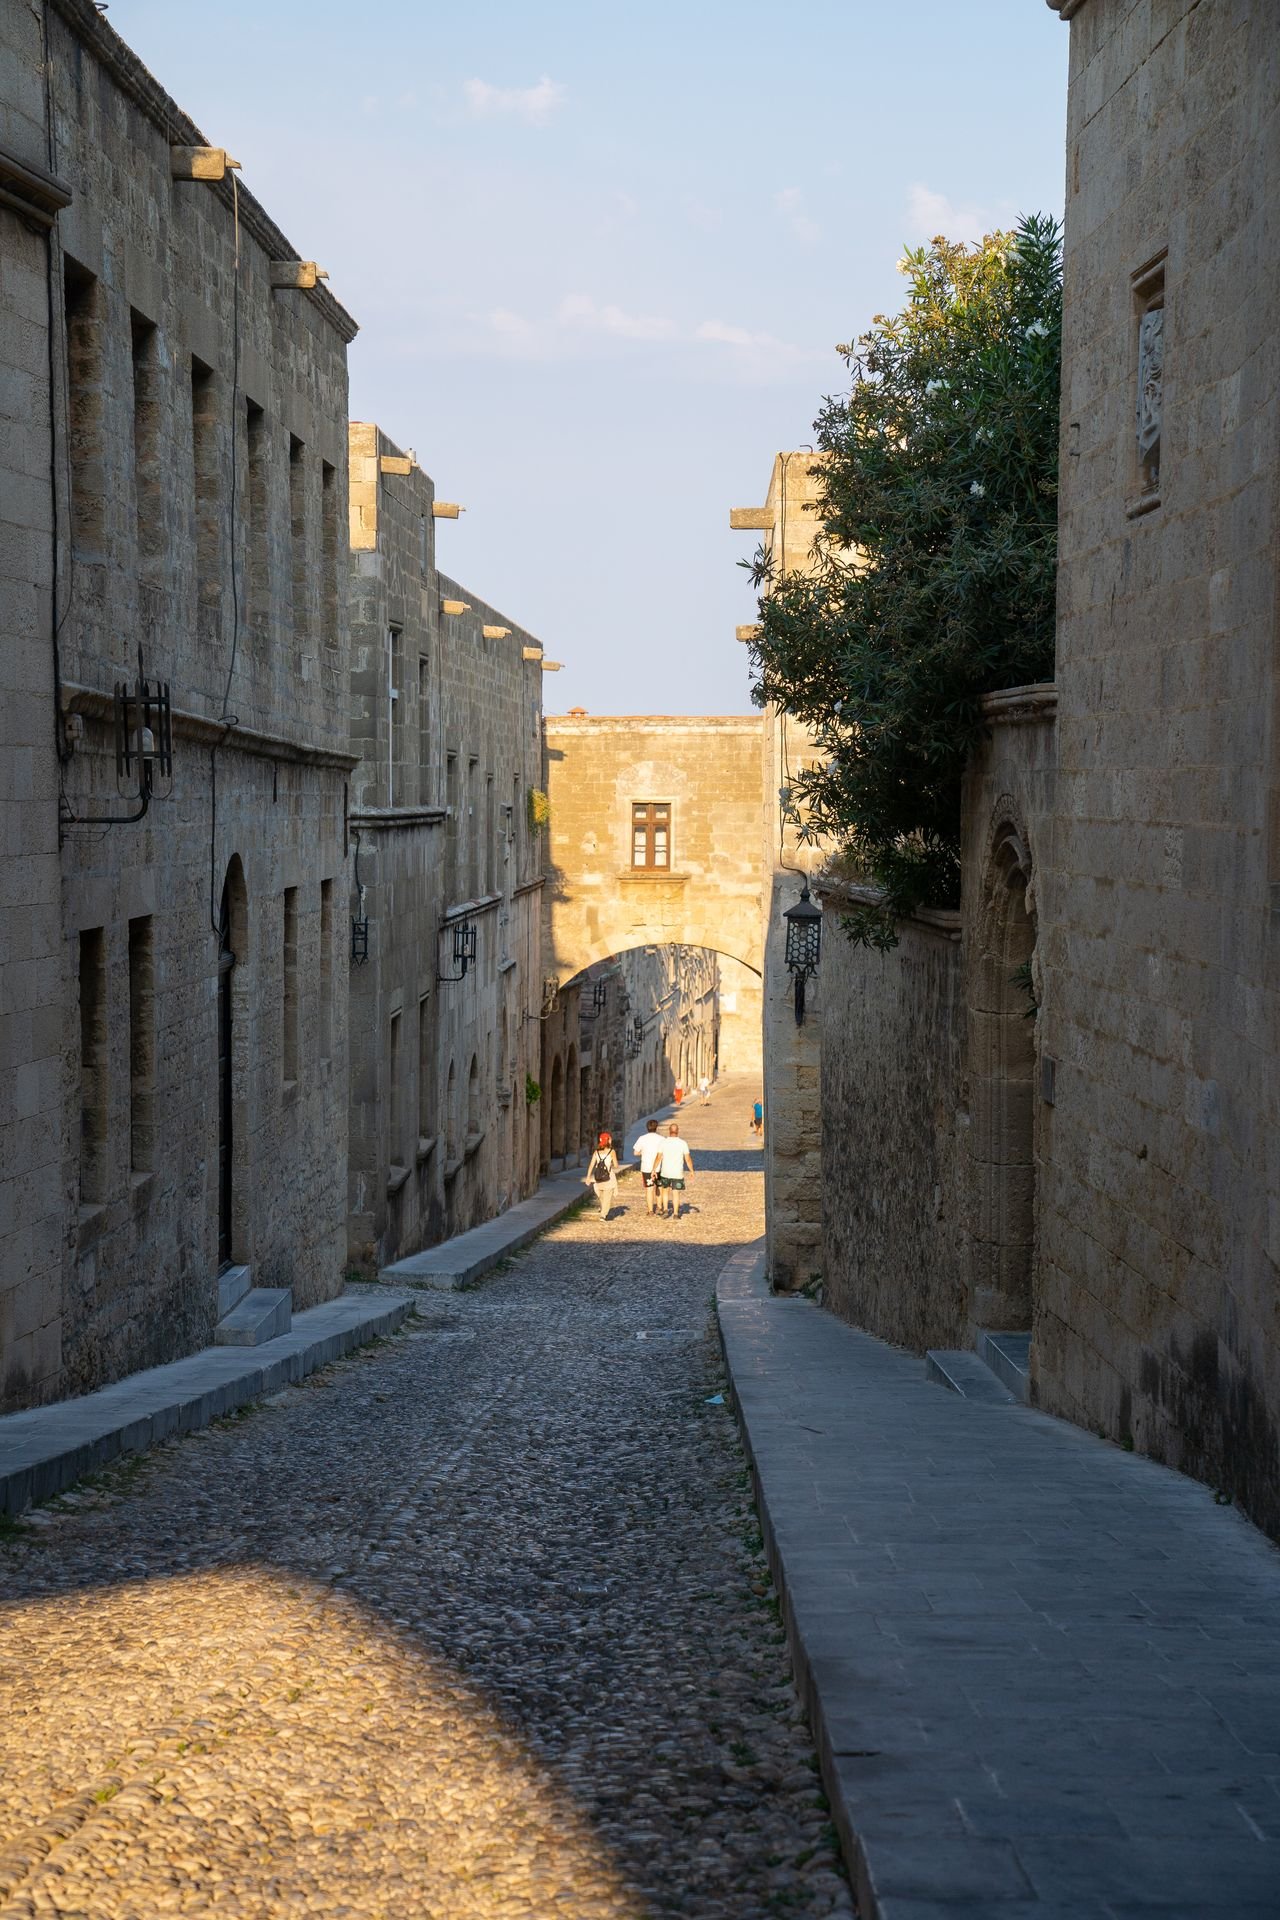 The Old Town of Rhodes is (almost) car-free